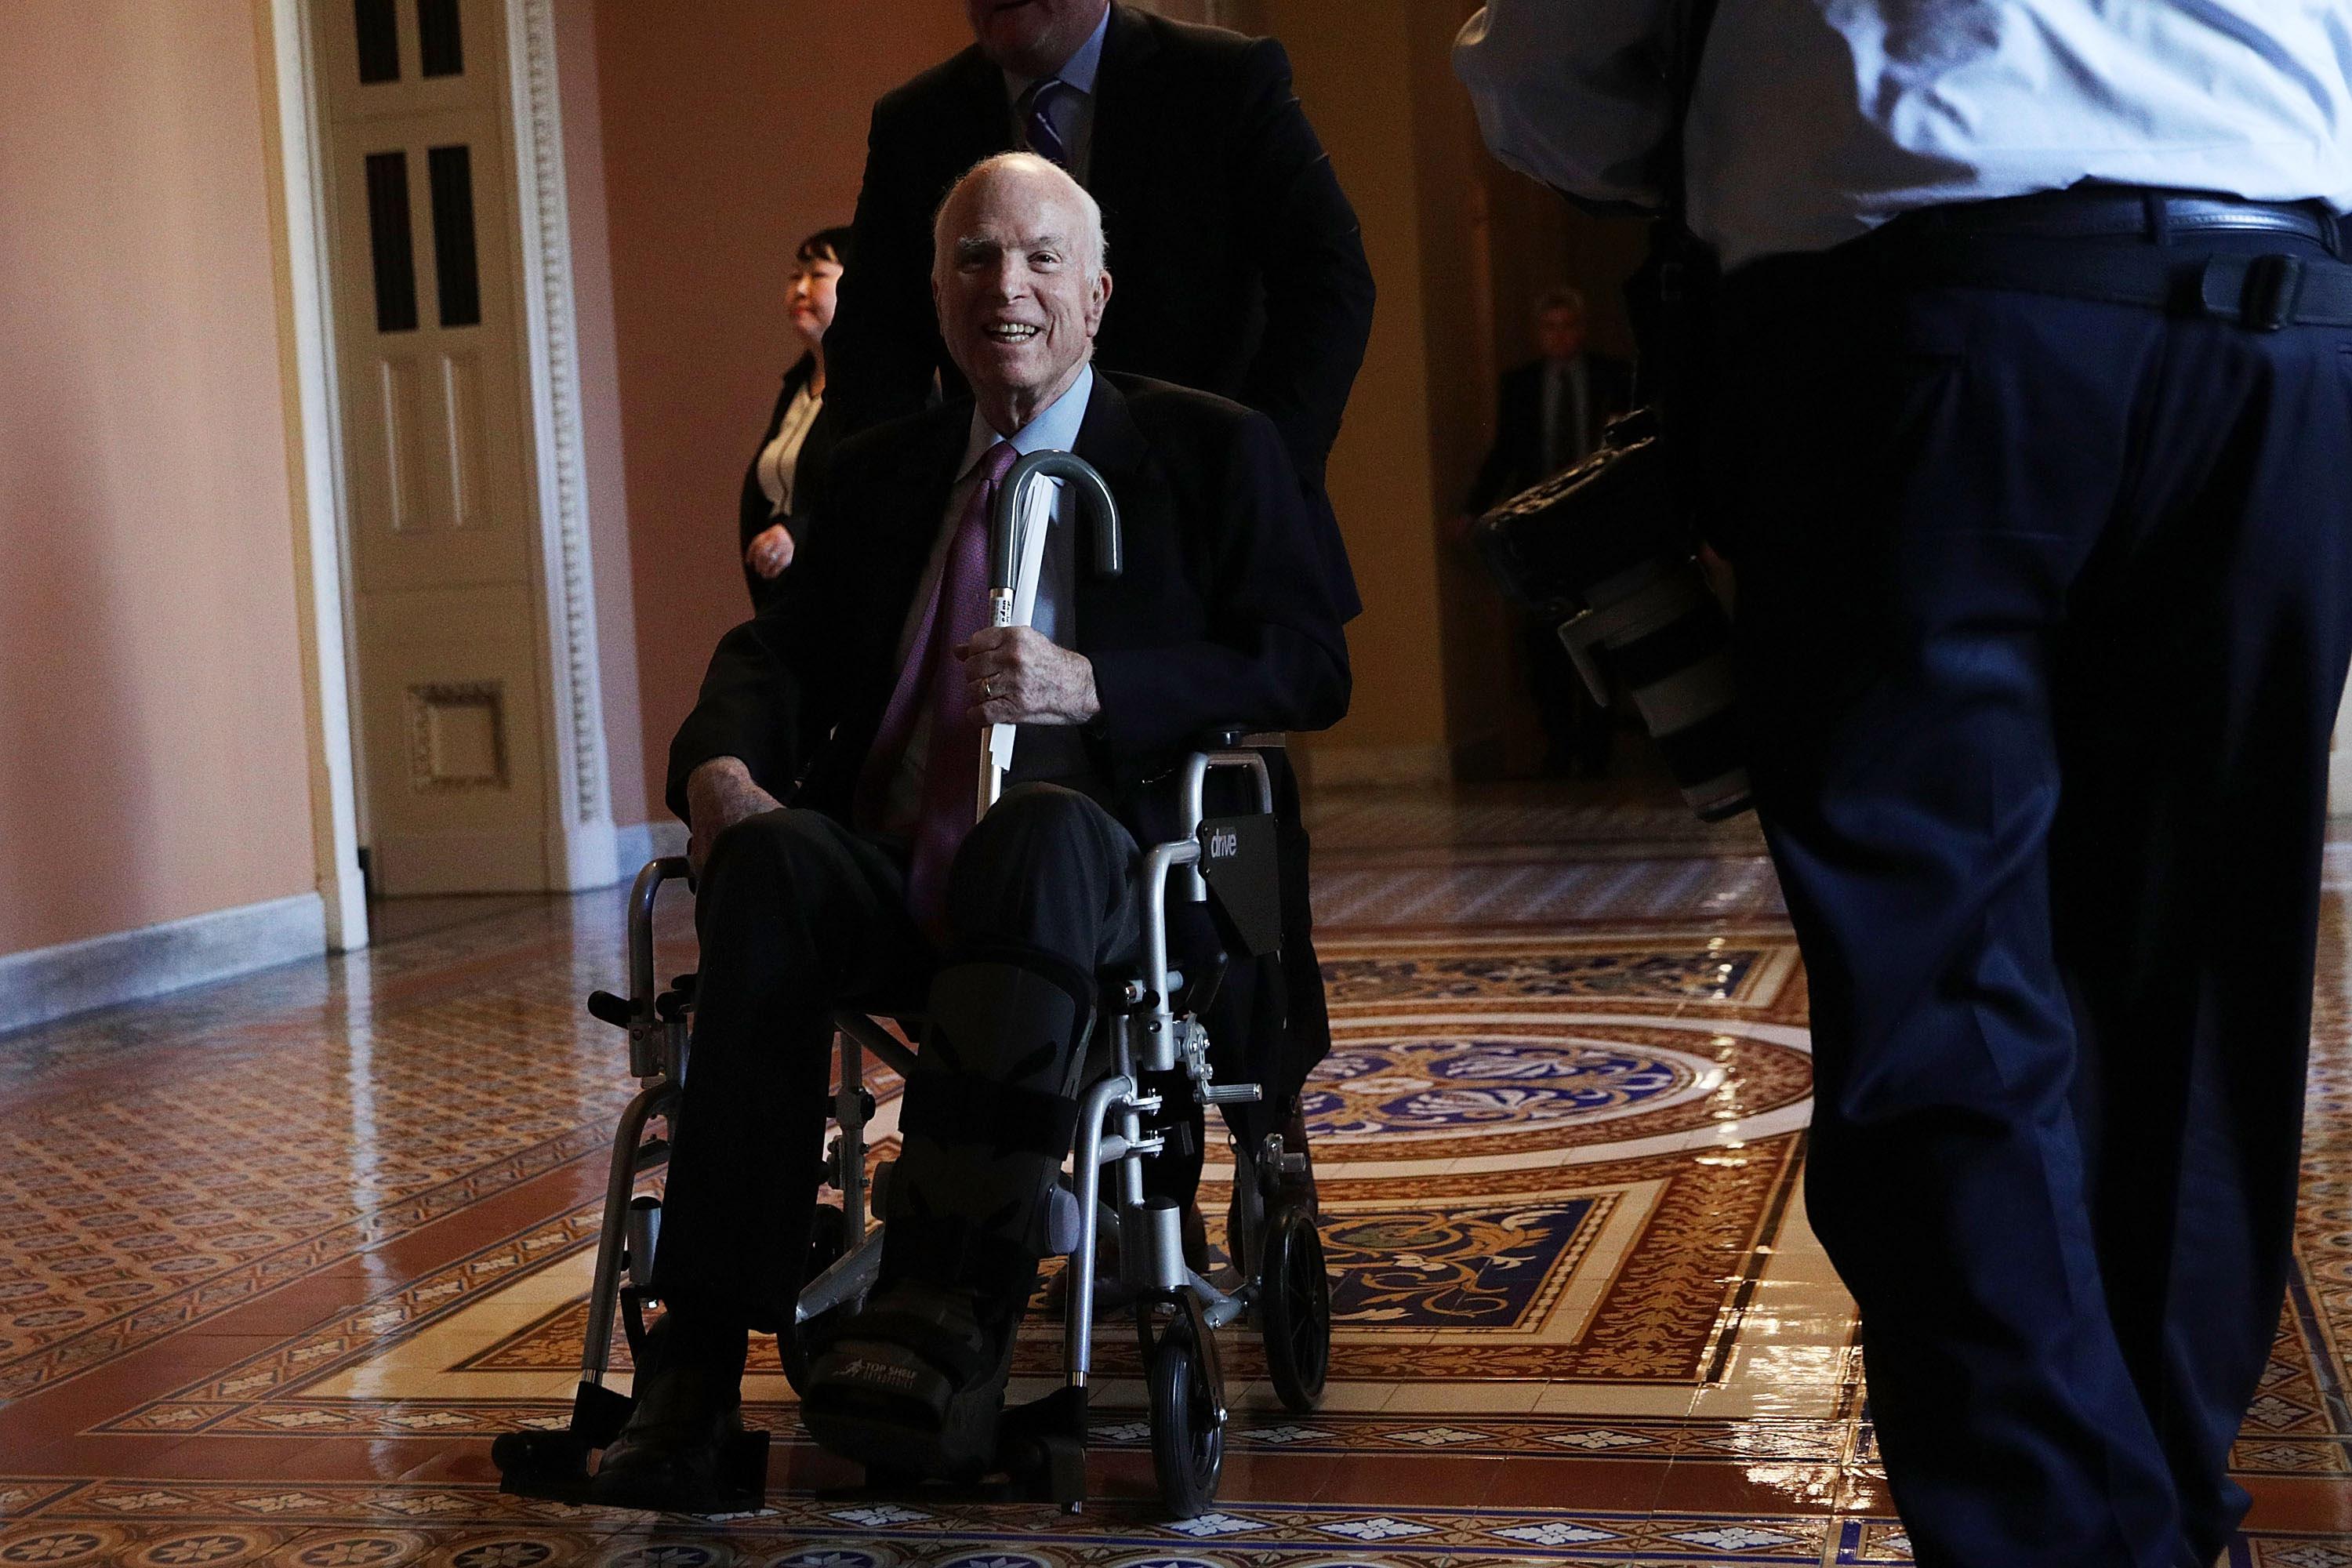 WASHINGTON, DC - DECEMBER 01:  U.S. Sen. John McCain (R-AZ) passes by on a wheelchair in a hallway at the Capitol December 1, 2017 in Washington, DC. Senate GOPs indicate that they have enough votes to pass the tax reform bill.  (Photo by Alex Wong/Getty Images)